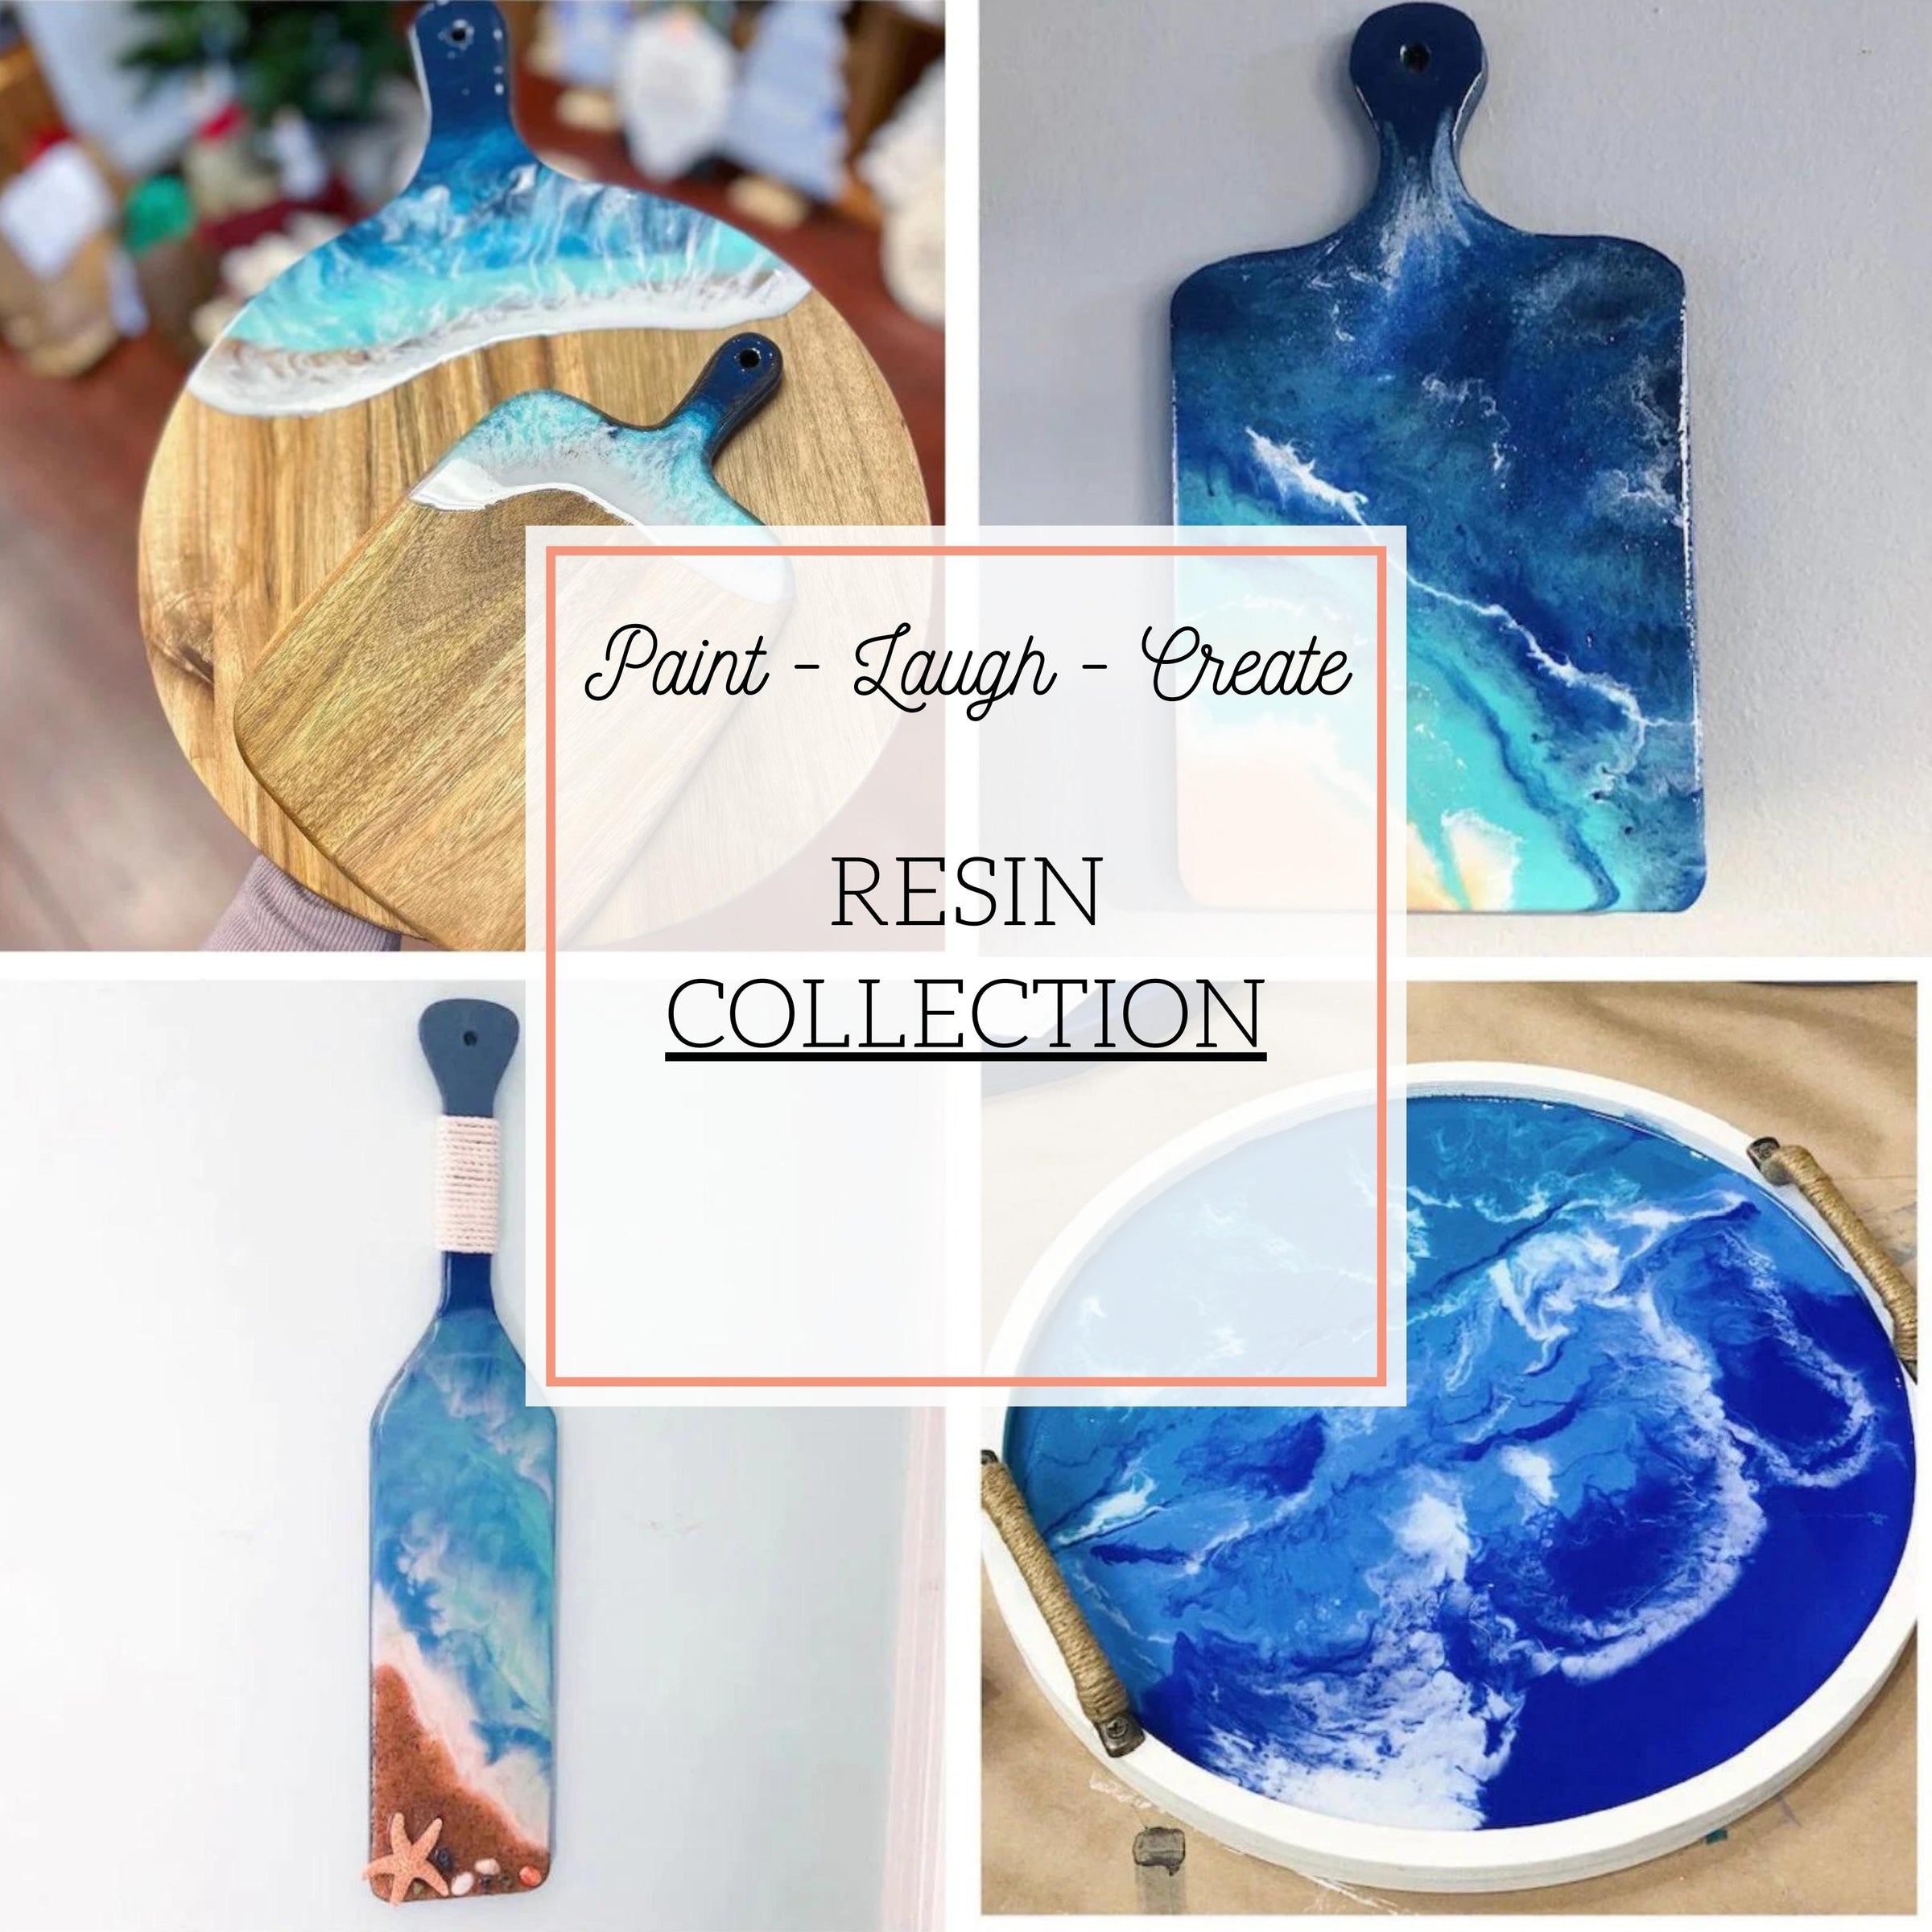 RESIN COLLECTION